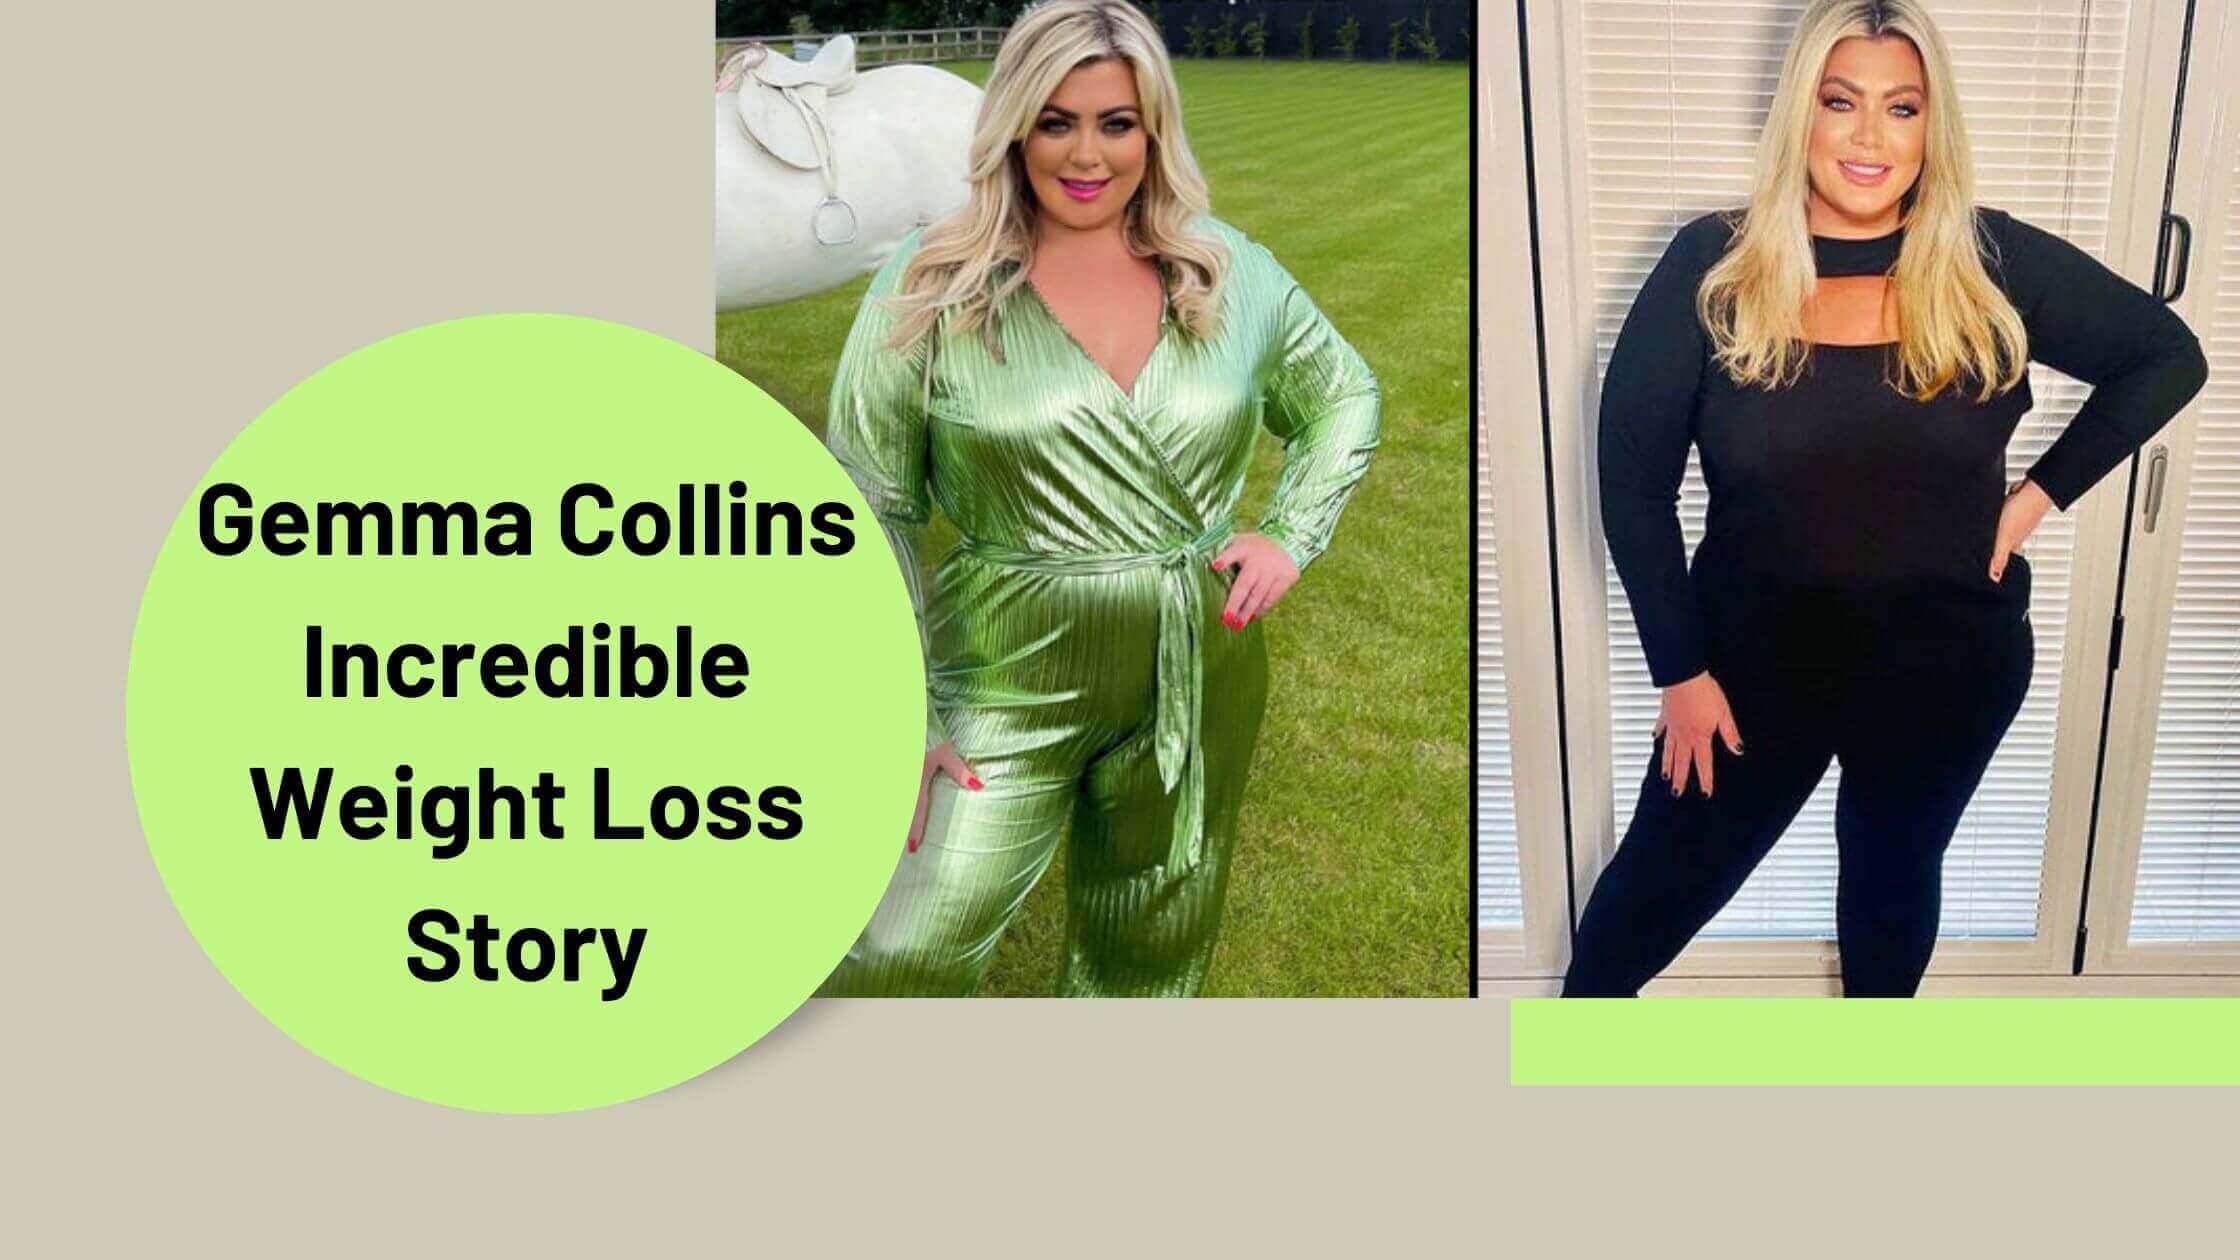 Gemma Collins Incredible Weight Loss Story